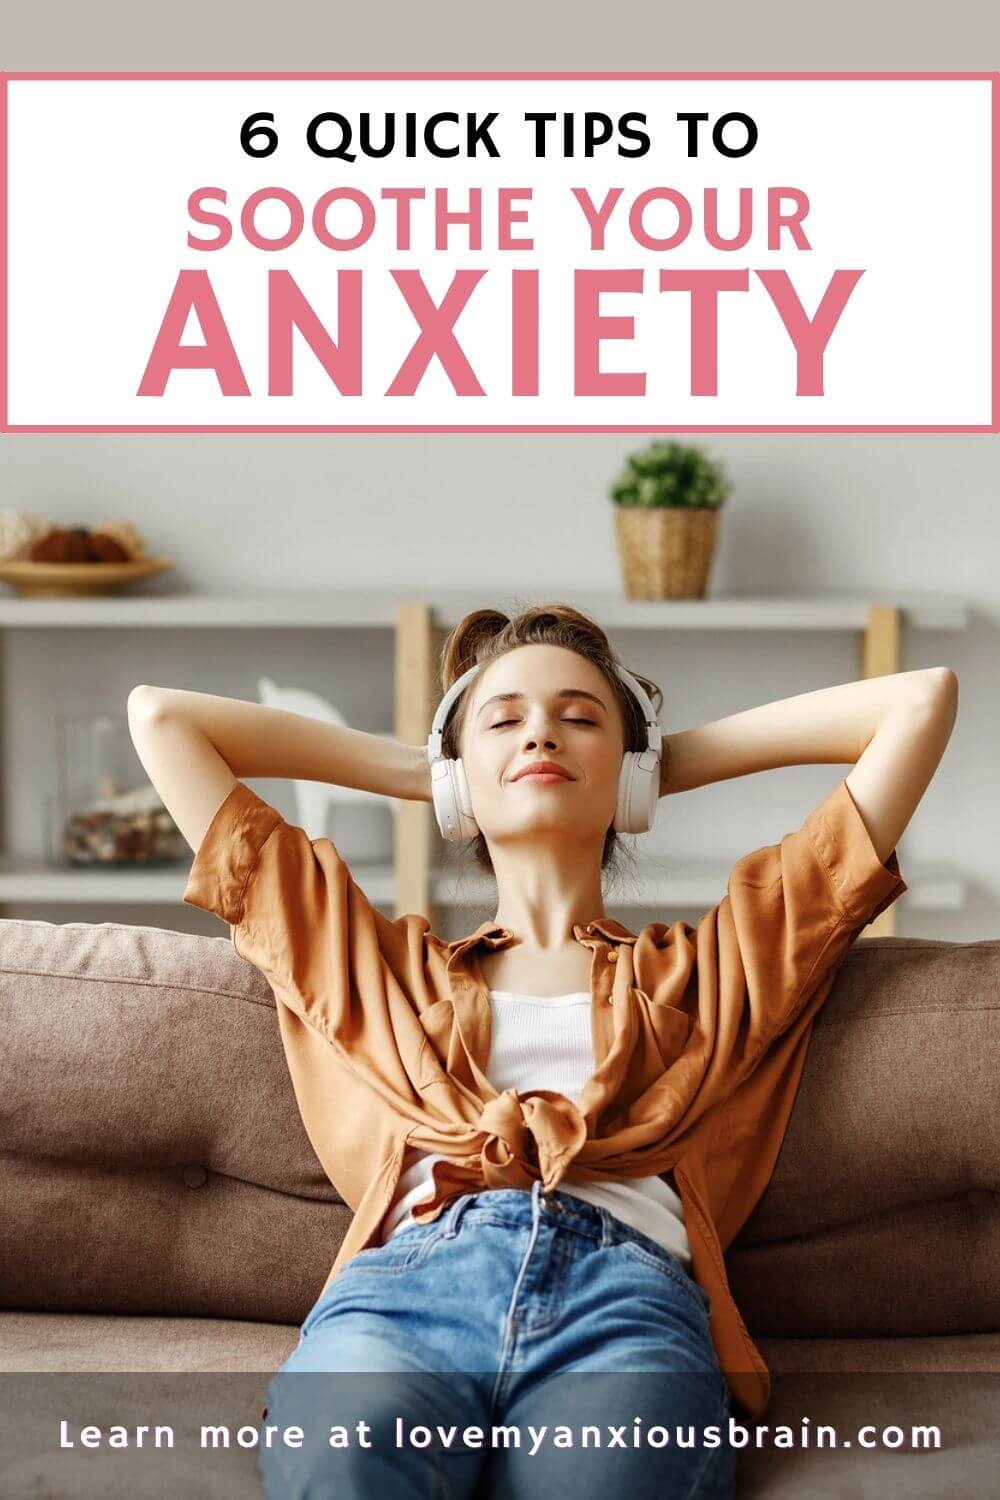 6 Quick Tips to Calm Your Anxiety: 10